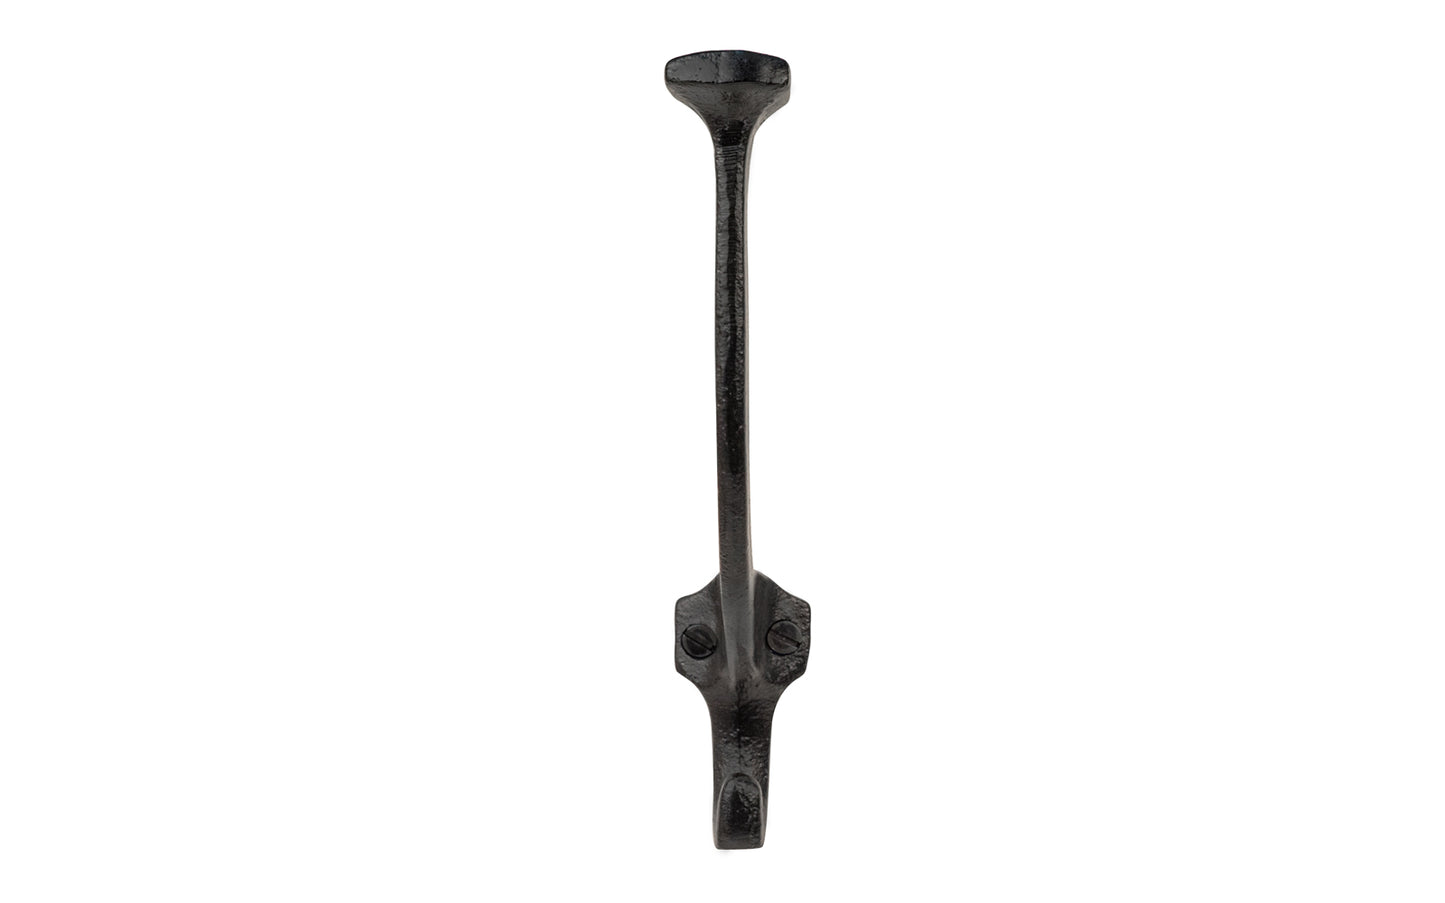 Vintage-style Hardware · A traditional Mission-Style Black Cast Iron Hall Tree Hook. Great for use in hallways, hall trees, coat racks, kitchens, bedrooms. The hook is made of strong cast iron material, making it durable for heavy coats, bags, & clothing. It also has a double hook, good for hanging multiple items.